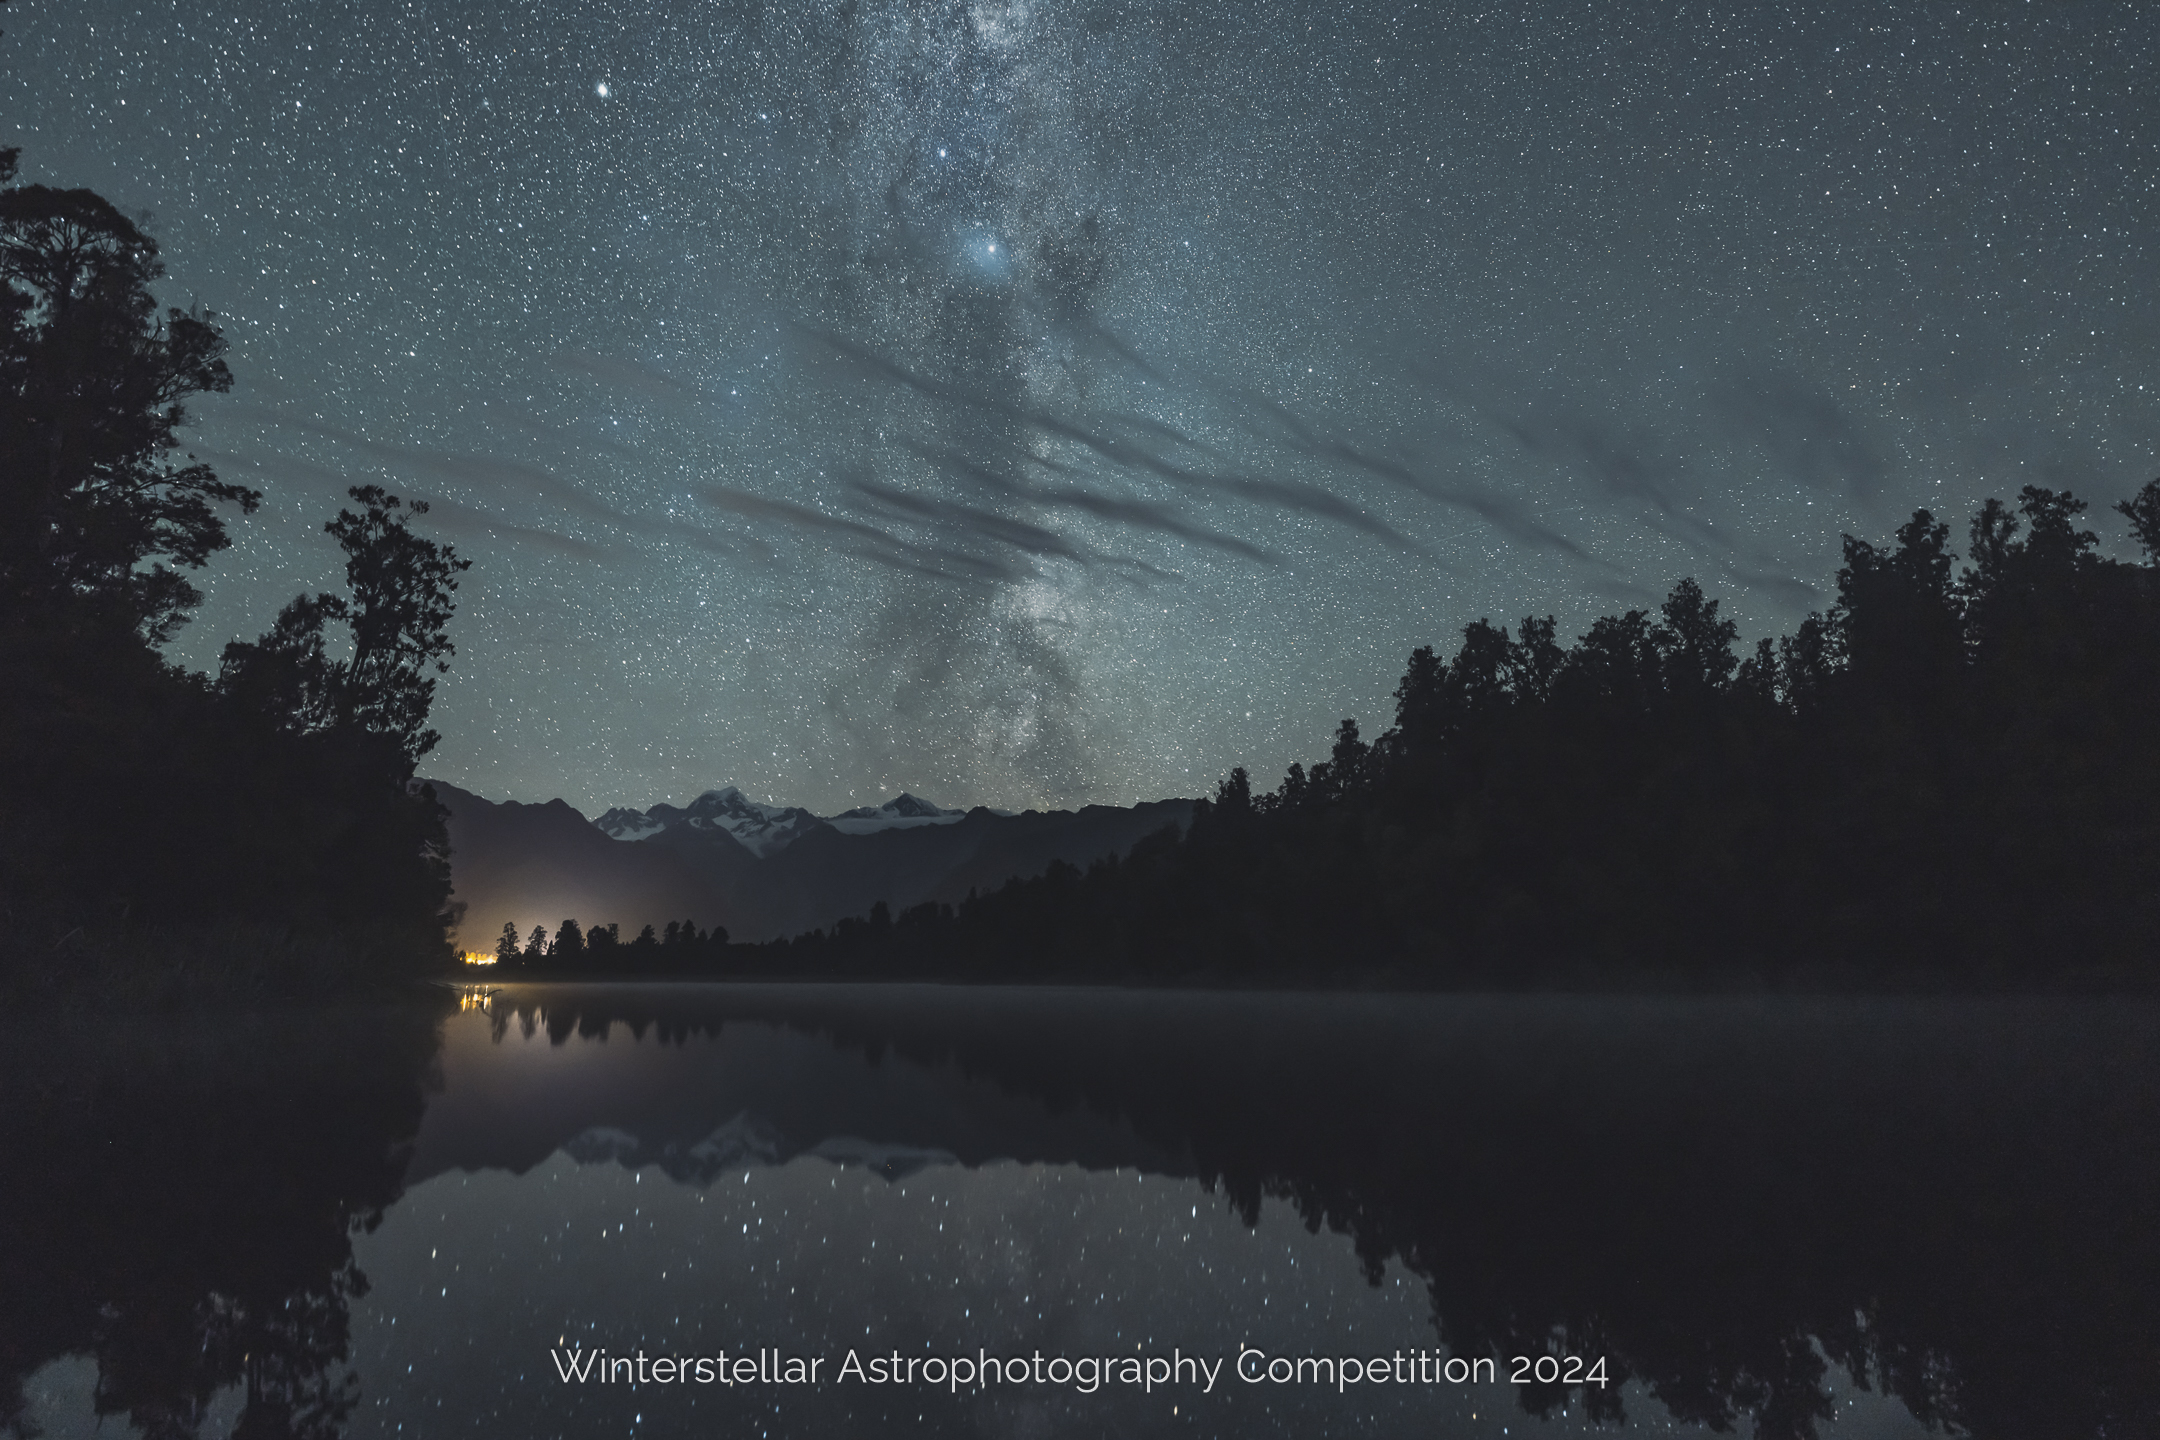 Milky way reflected in still waters of lake surrounded by forest.